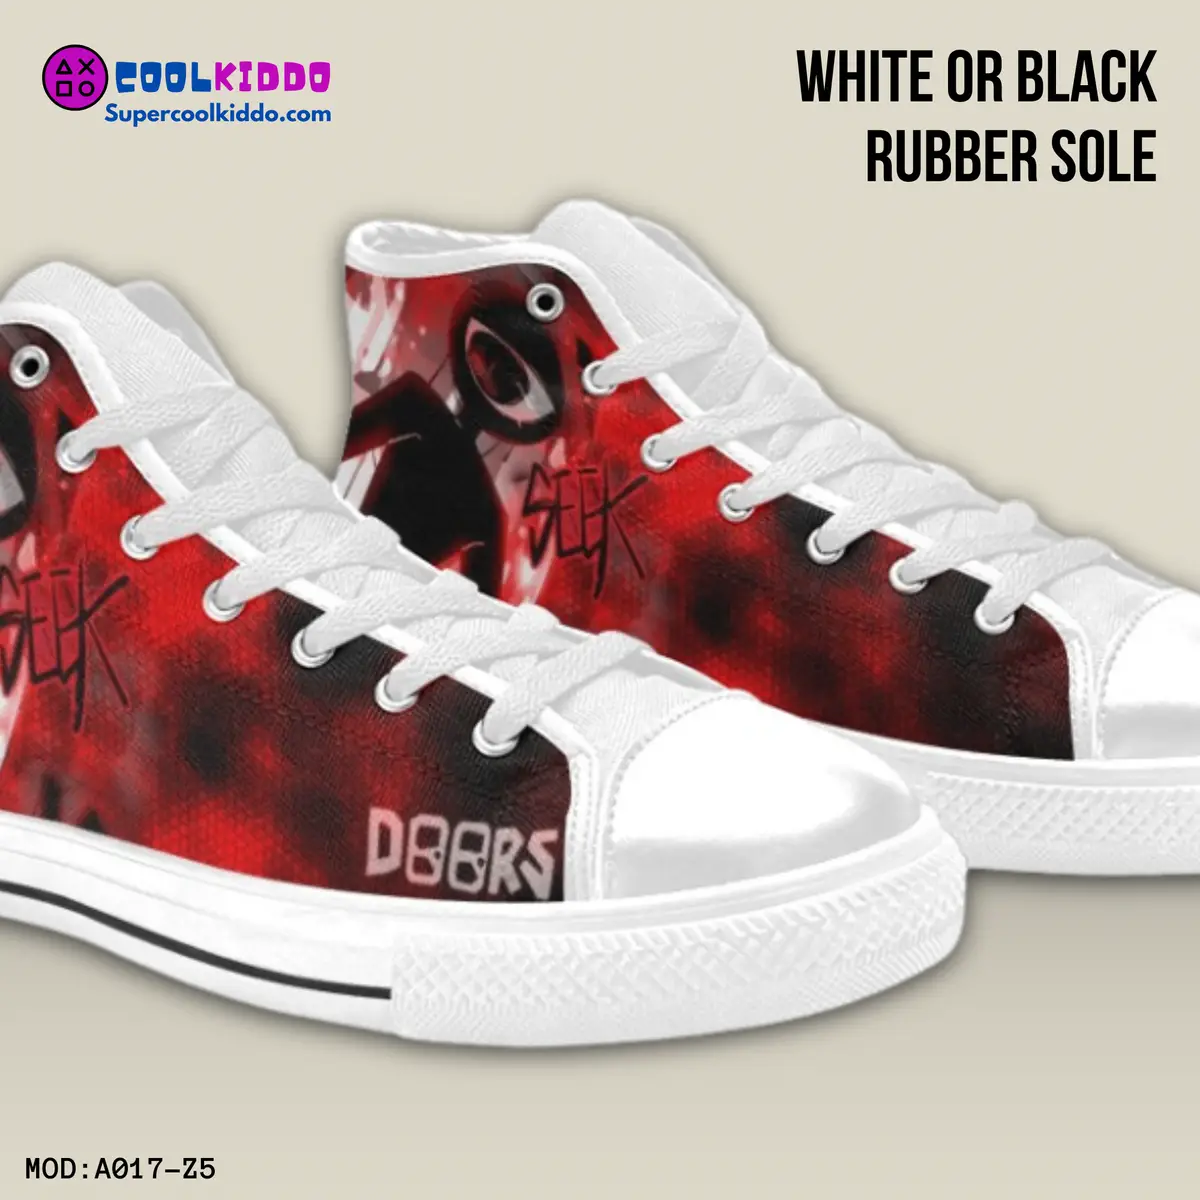 Roblox Doors Inspired High Top Shoes for Kids/Youth – “Seek” Character Print. High-Top Sneakers Cool Kiddo 26